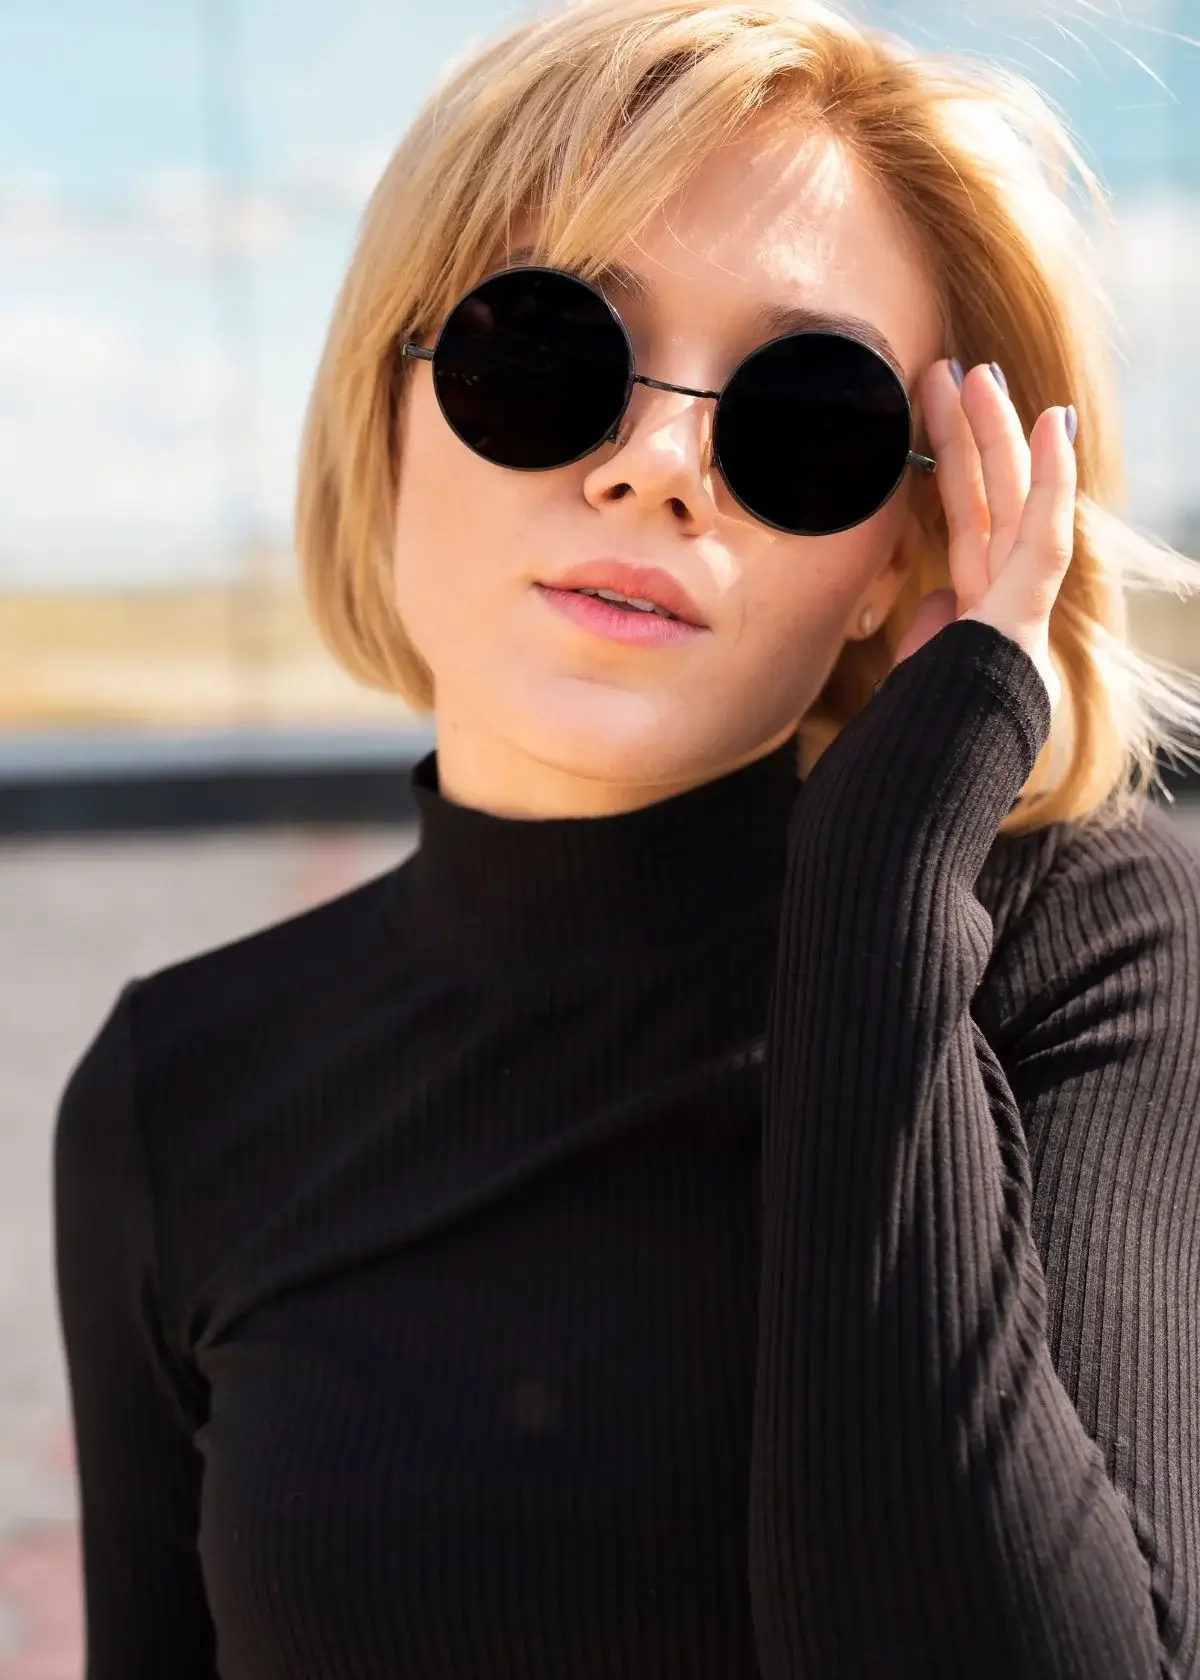 How to choose the right sunglasses for a round face?